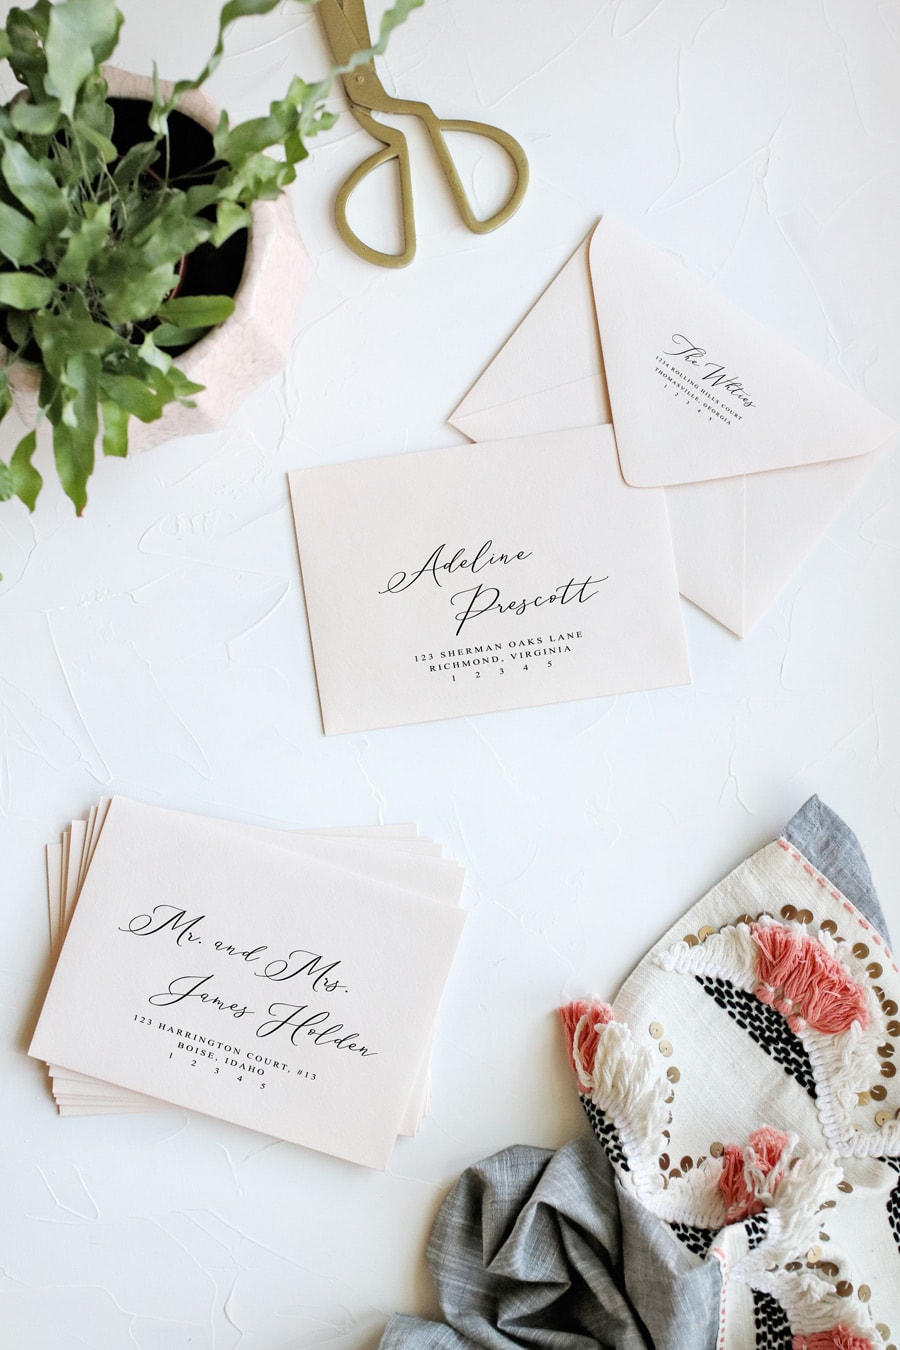 How to print envelopes the easy way | How to print your envelopes | Envelope template | Print wedding envelopes | DIY wedding envelopes